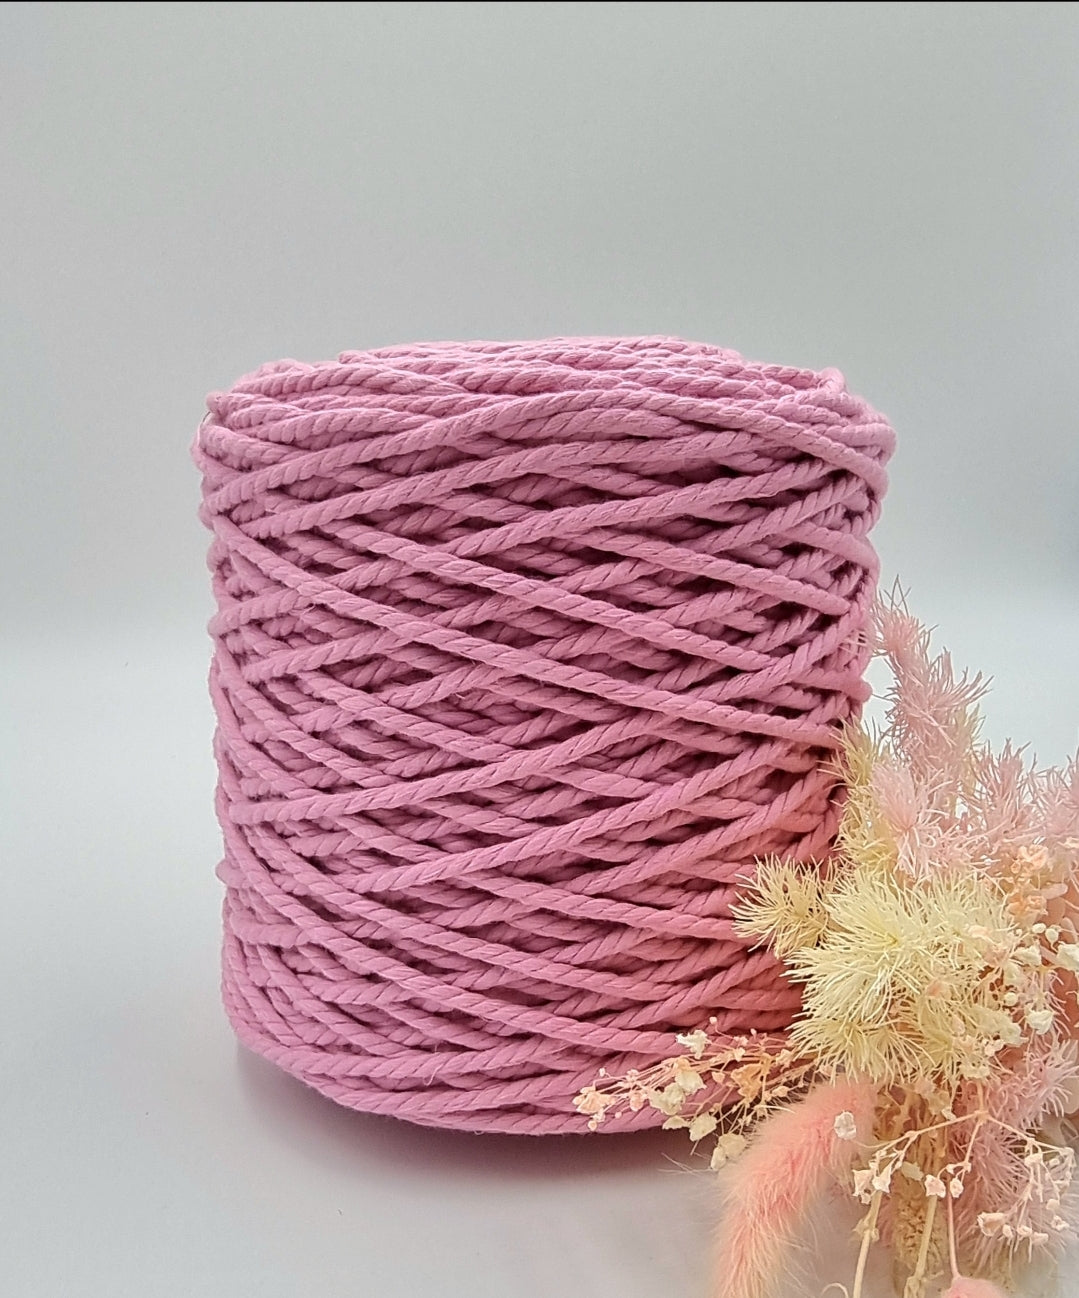 Candy Pink 3 Strand Macrame Cord - 3MM 3 Strand Luxe Cotton String 1KG Stardust Melbourne